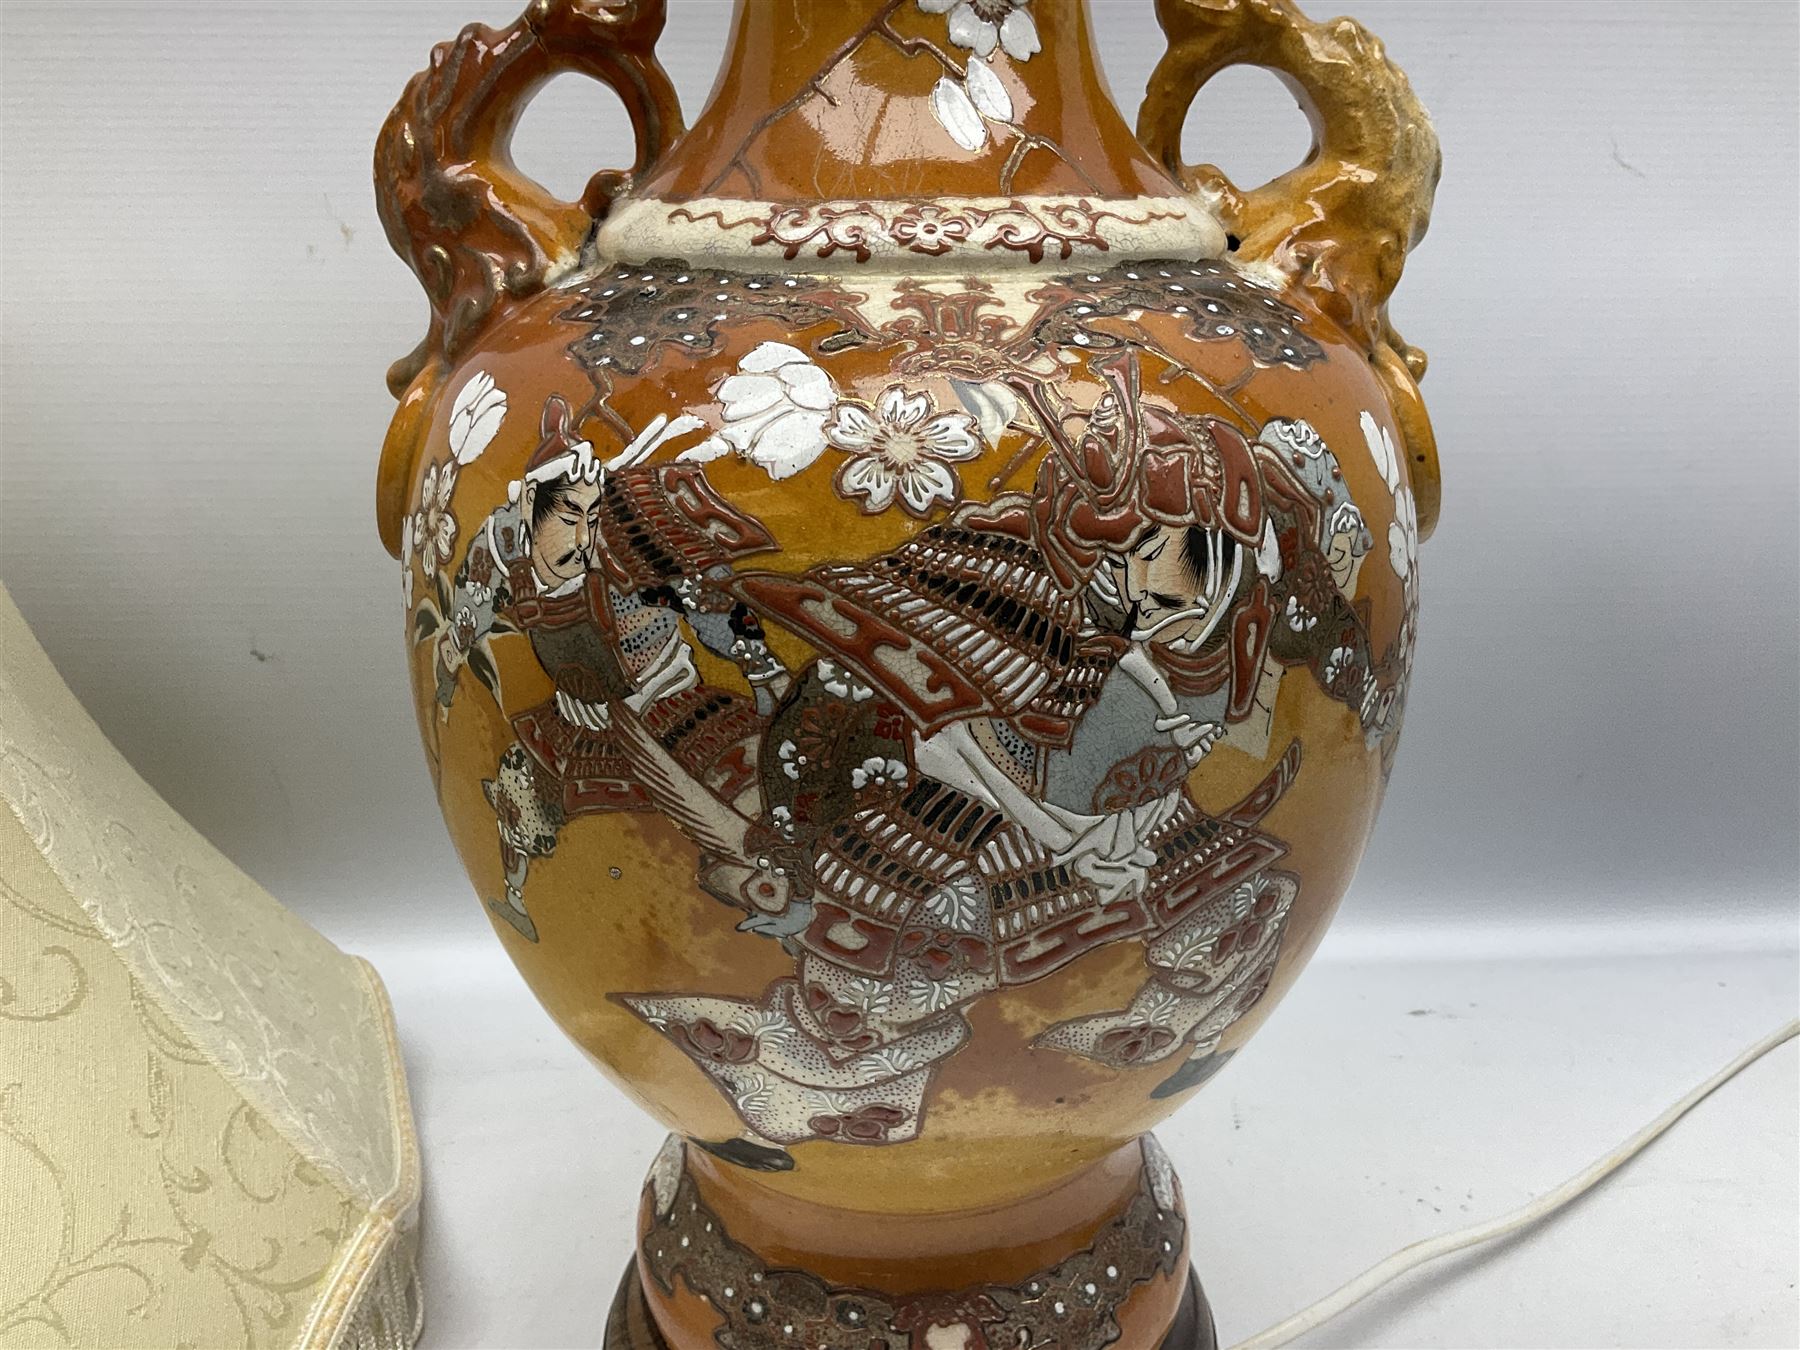 20th century Japanese vase converted to a lamp - Image 4 of 6